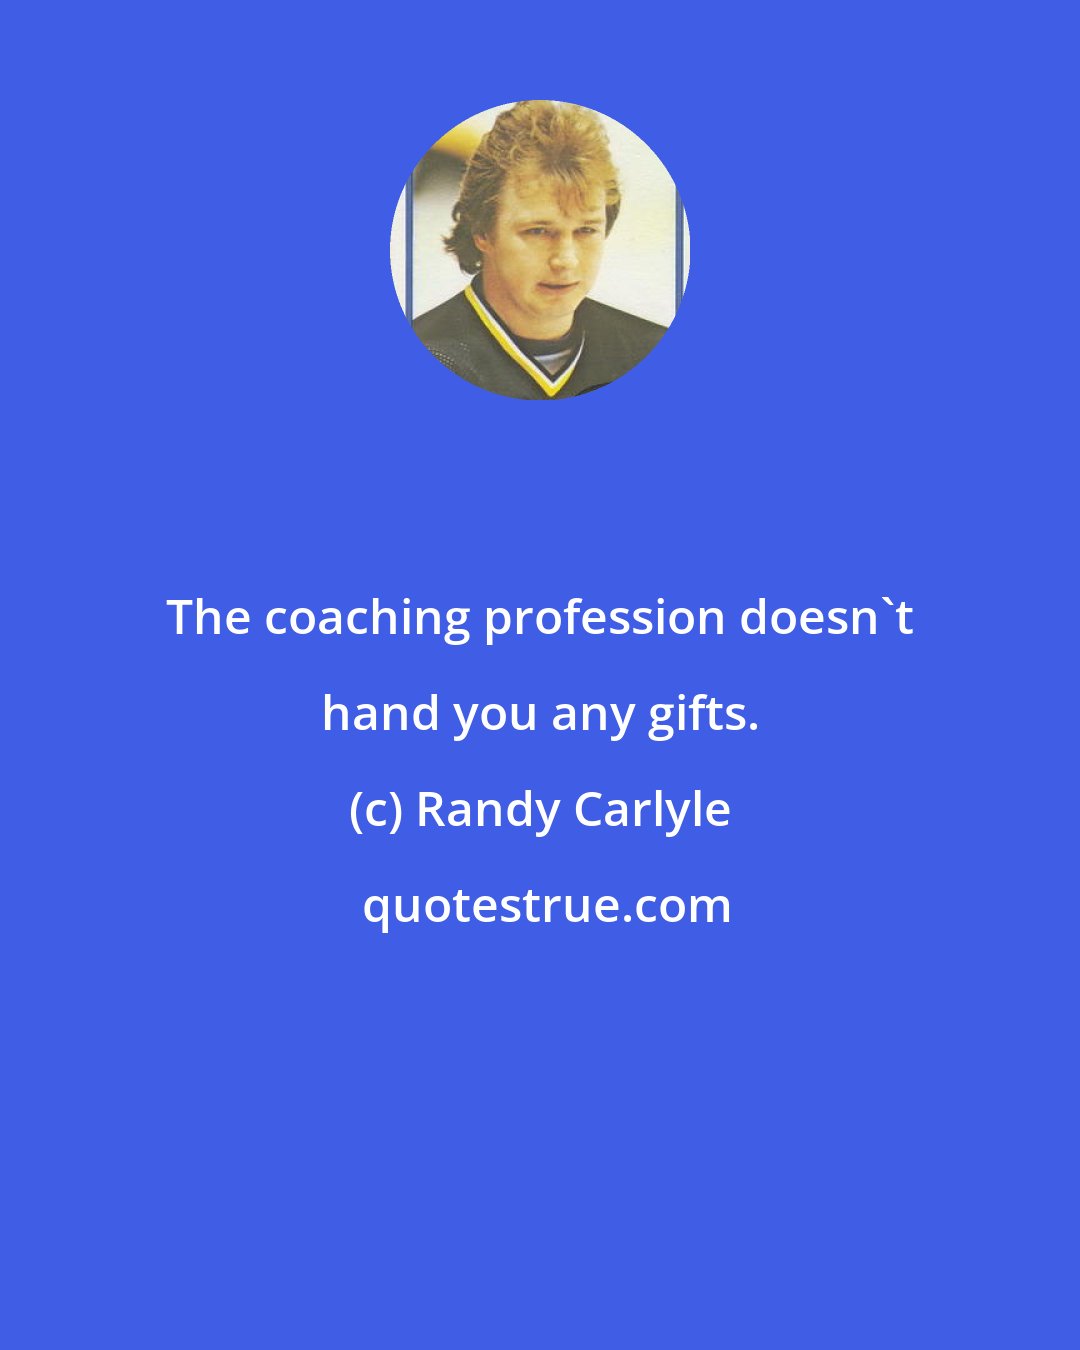 Randy Carlyle: The coaching profession doesn't hand you any gifts.